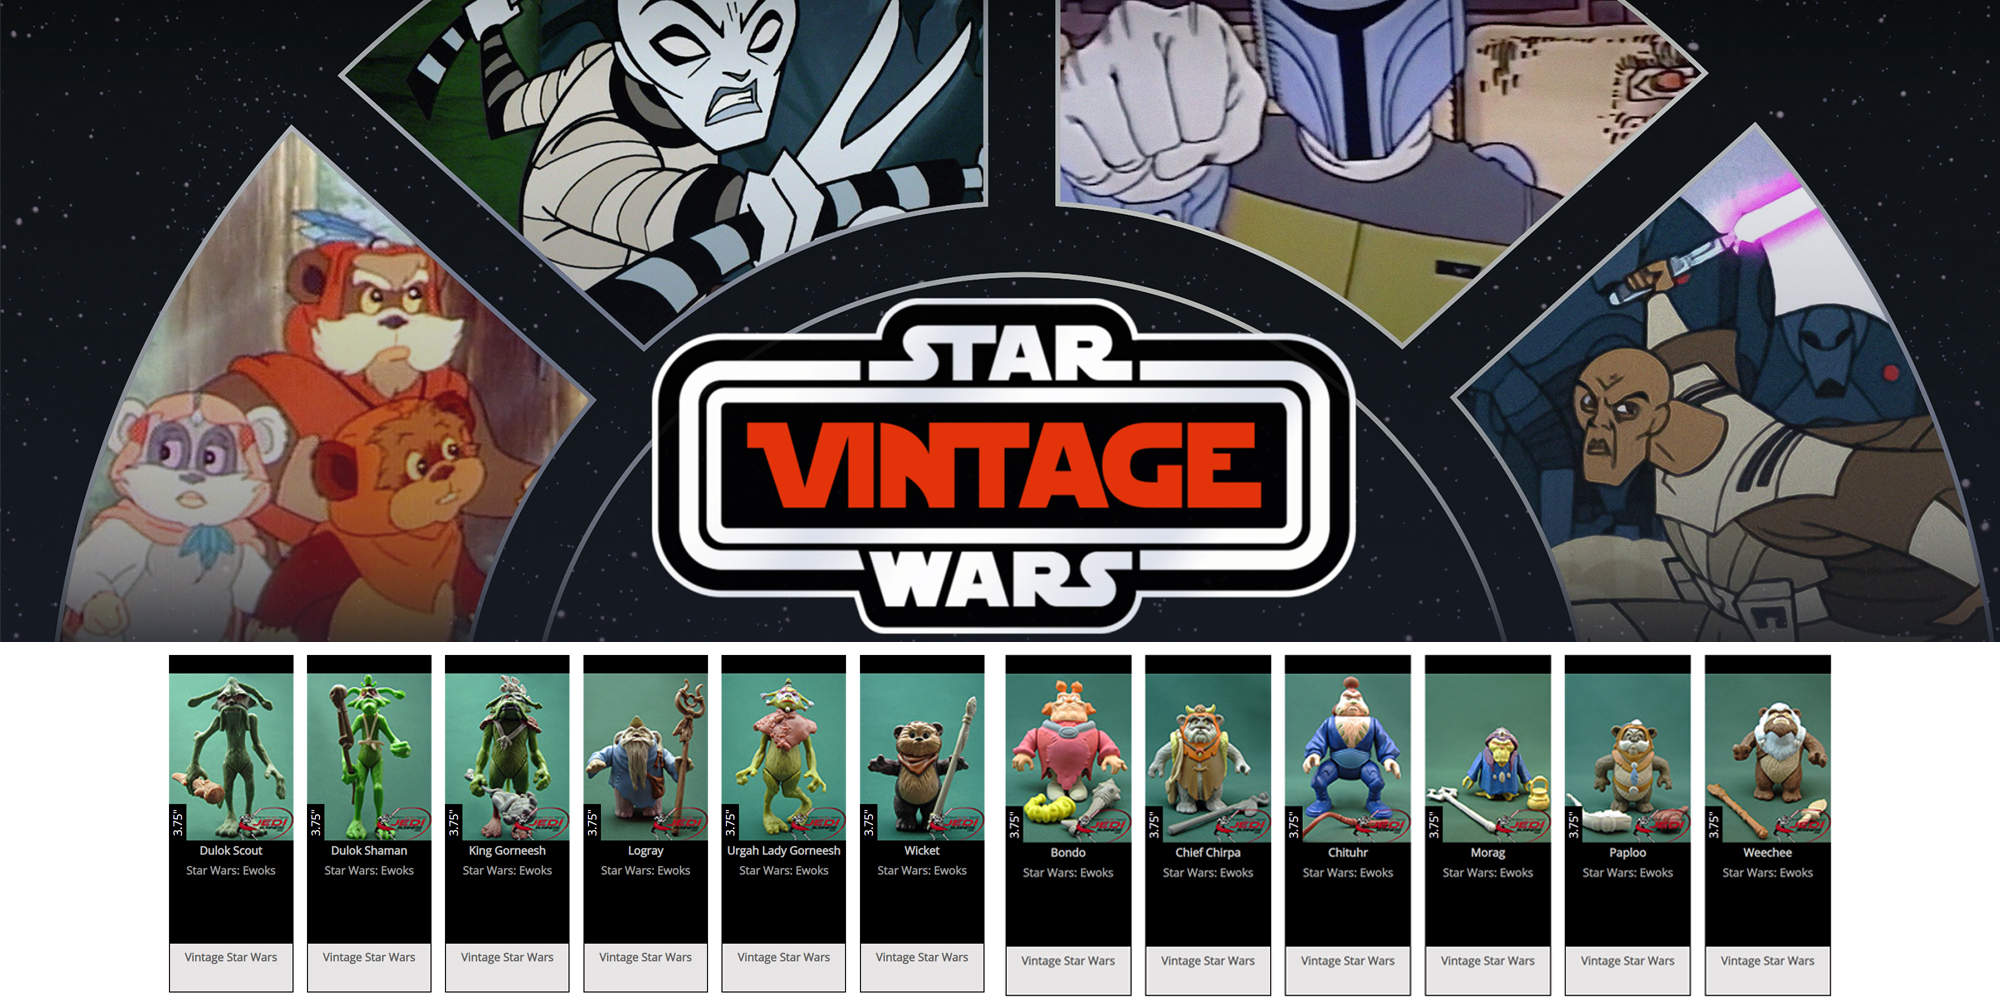 Vintage Star Wars Cartoons And Movies Are Now On Disney+